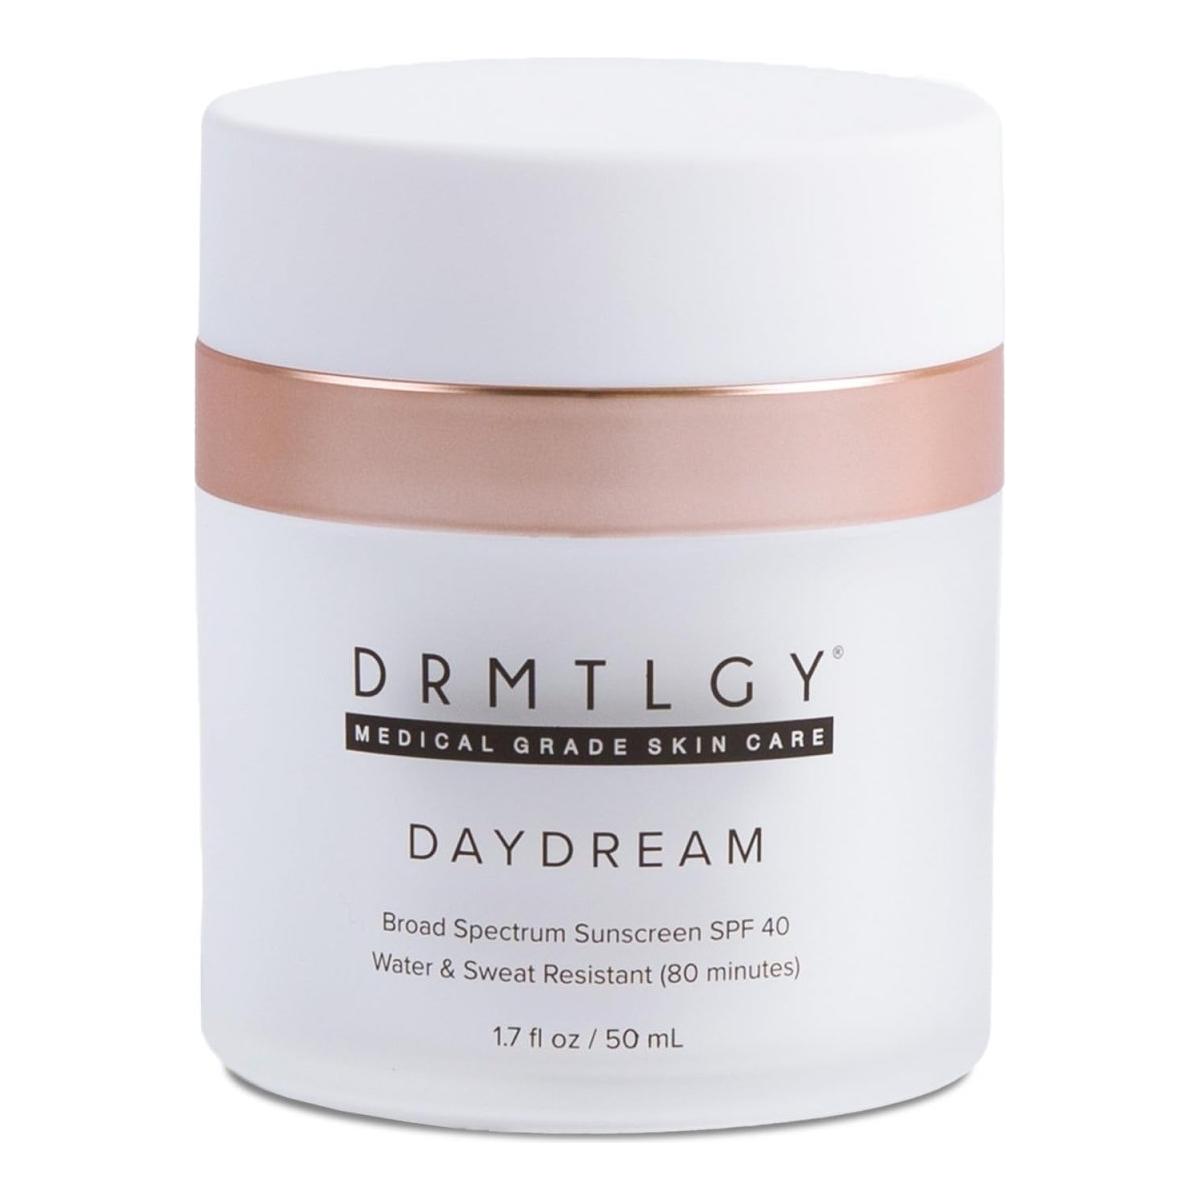 DRMTLGY Day Dream Sunscreen & Face Moisturizer with SPF 40 - 50ml - Glam Global UK